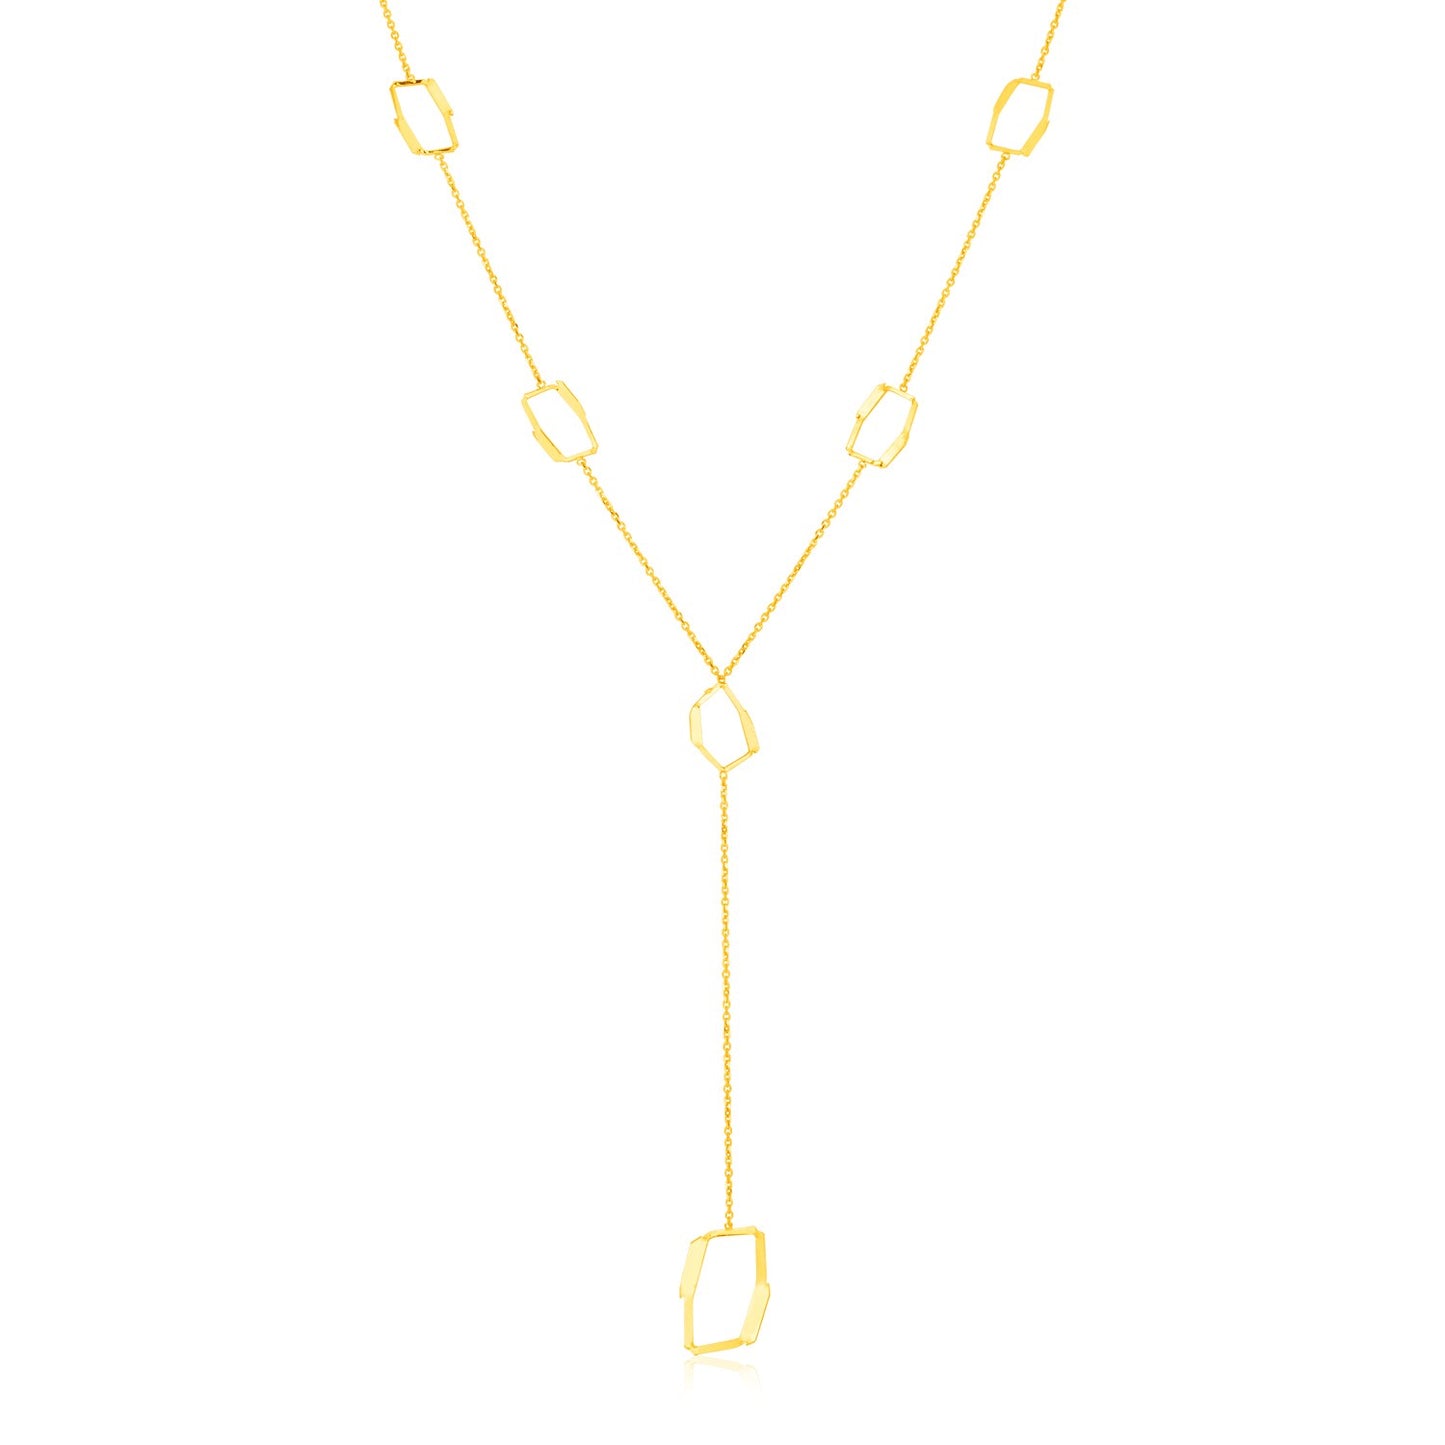 14K Yellow Gold Necklace with Abstract Honeycomb Stations